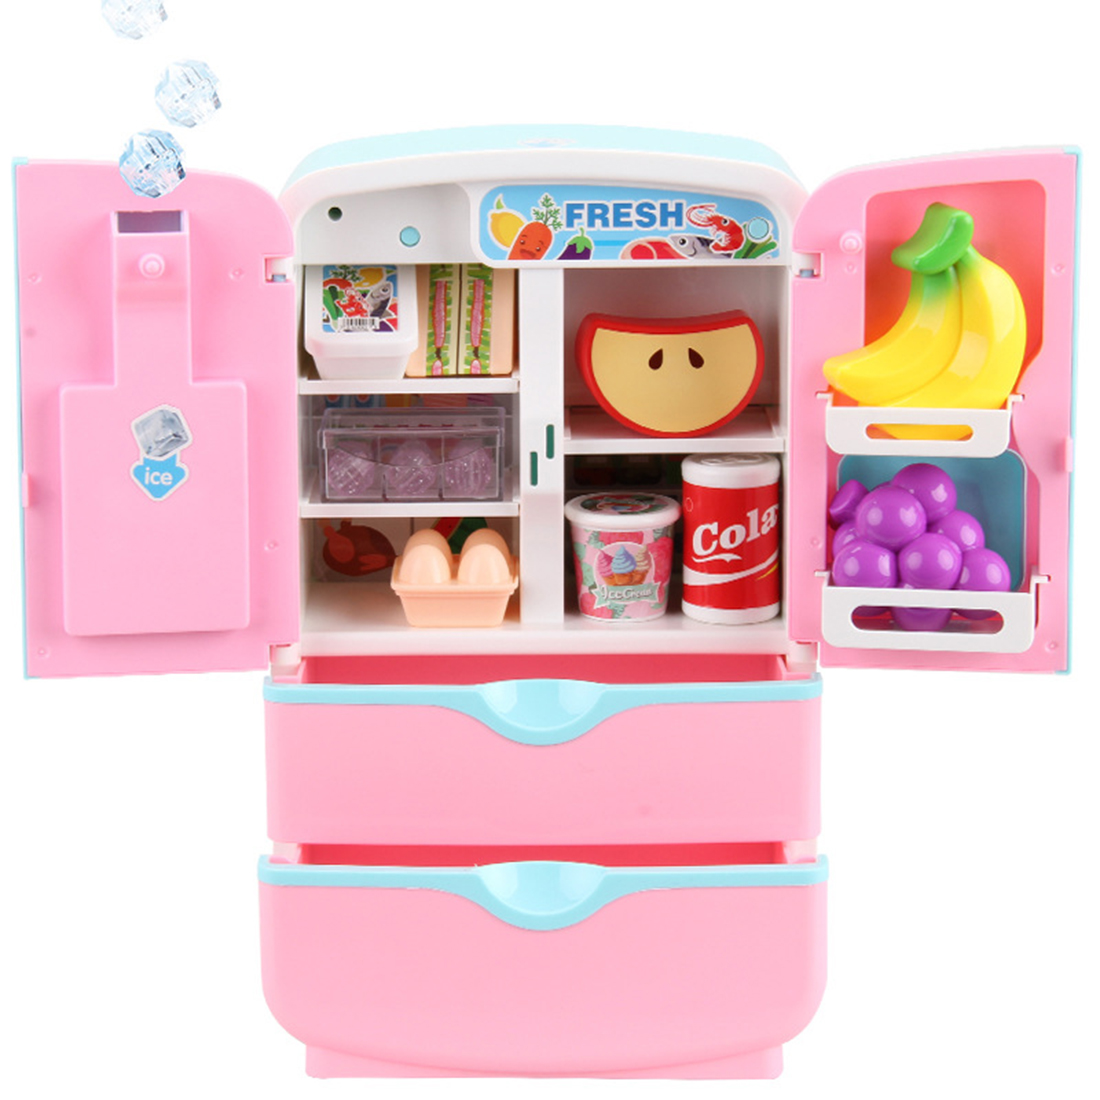 12Pcs/set Kids Double Door Role Play Fridge Toy Touch Sensitive Magic Refrigerator Educational Home Appliance Toy - Pink